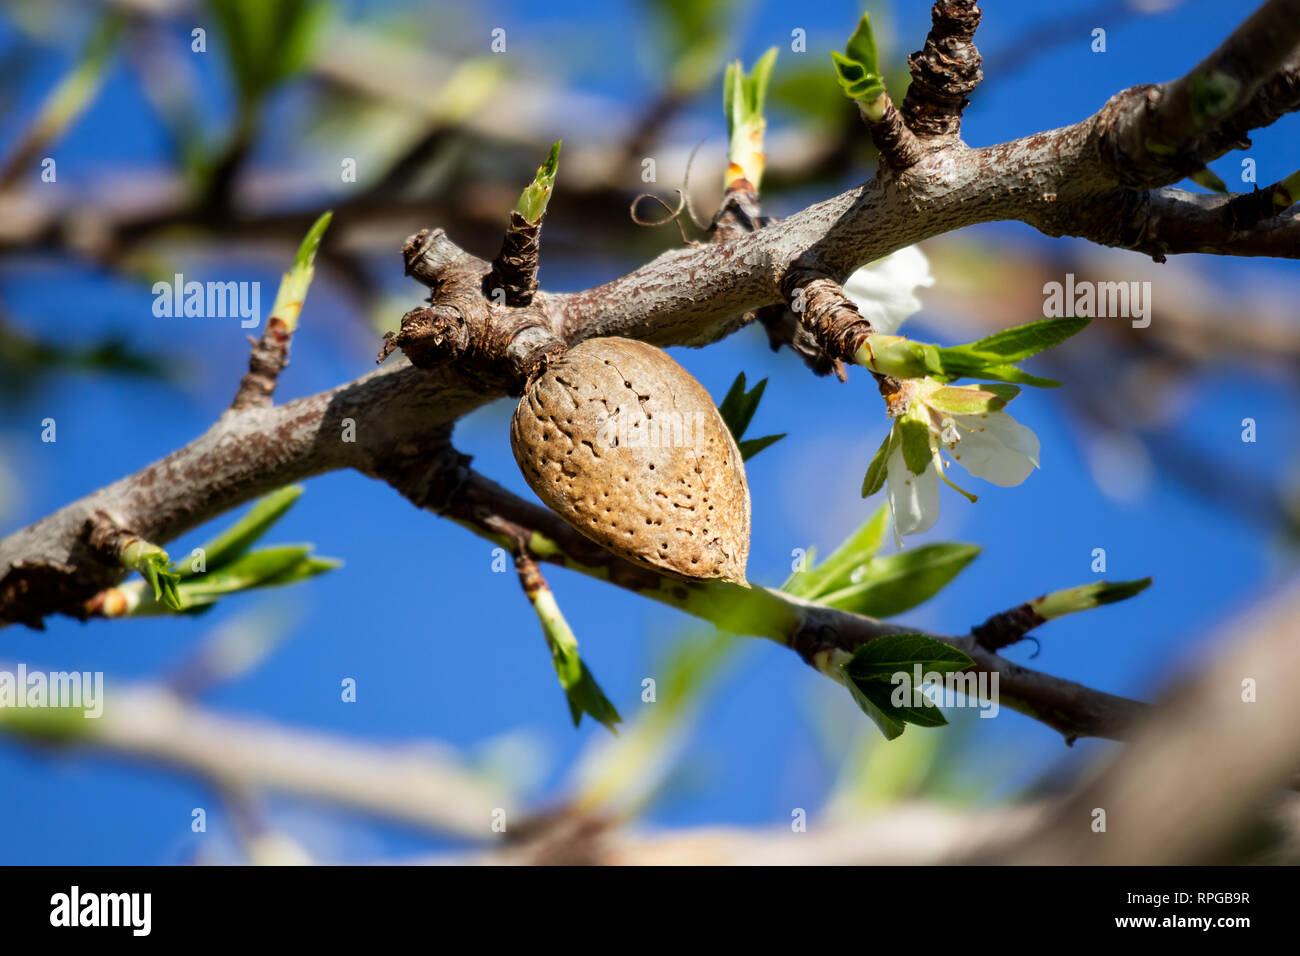 Almond blossom and drupe Stock Photo